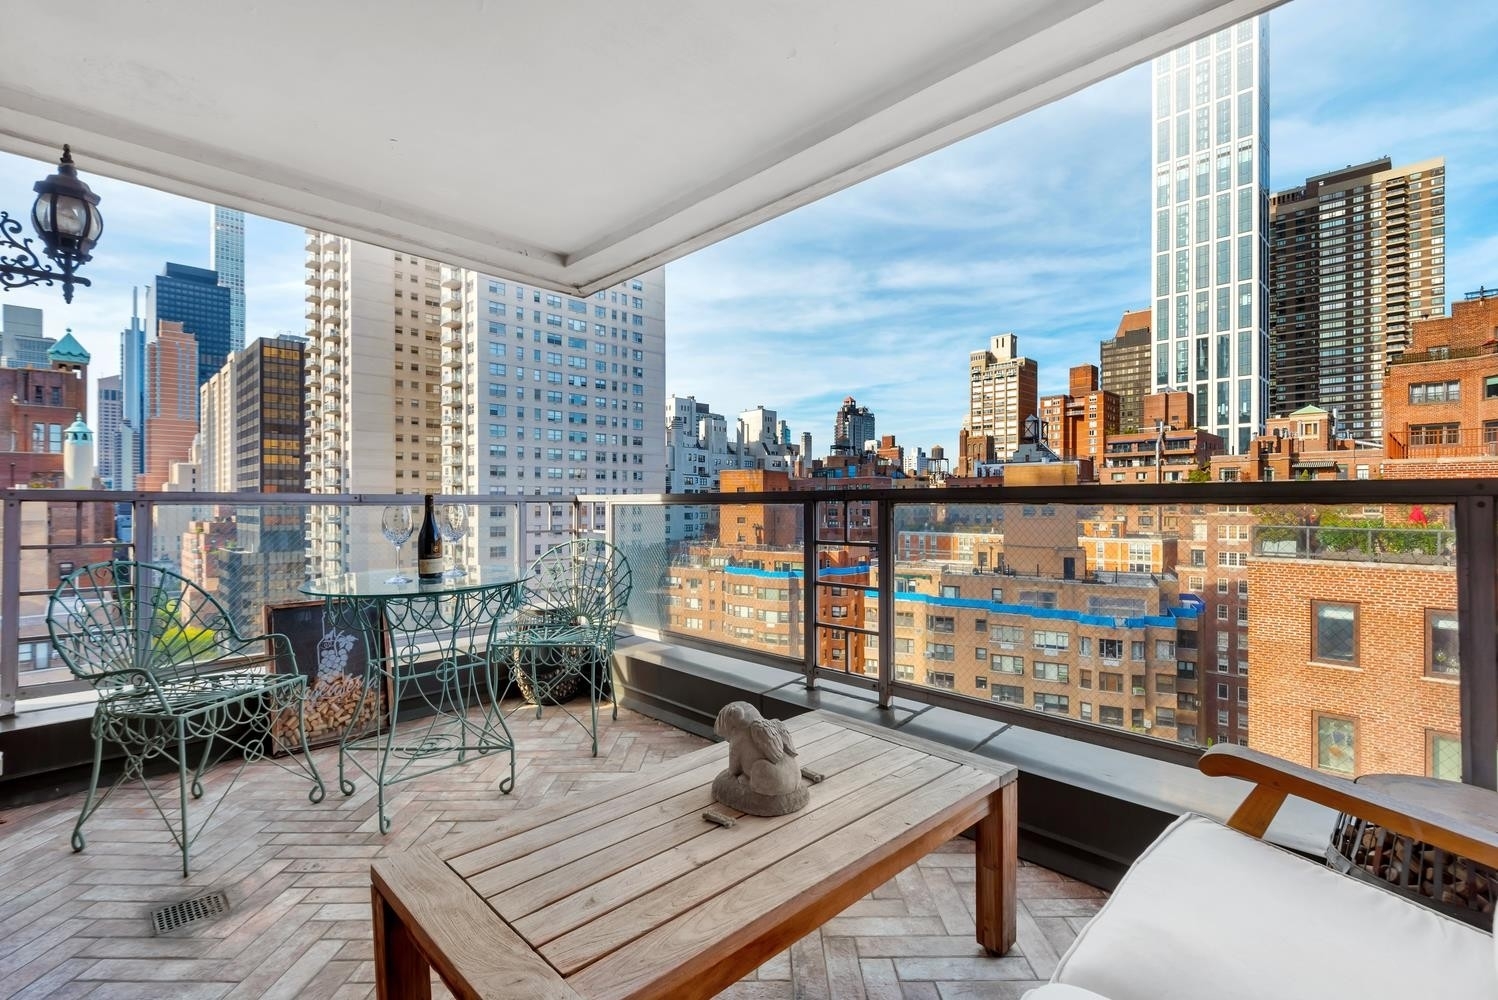 Co-op Properties for Sale at 50 SUTTON PL S, 20C Sutton Place, New York, NY 10022